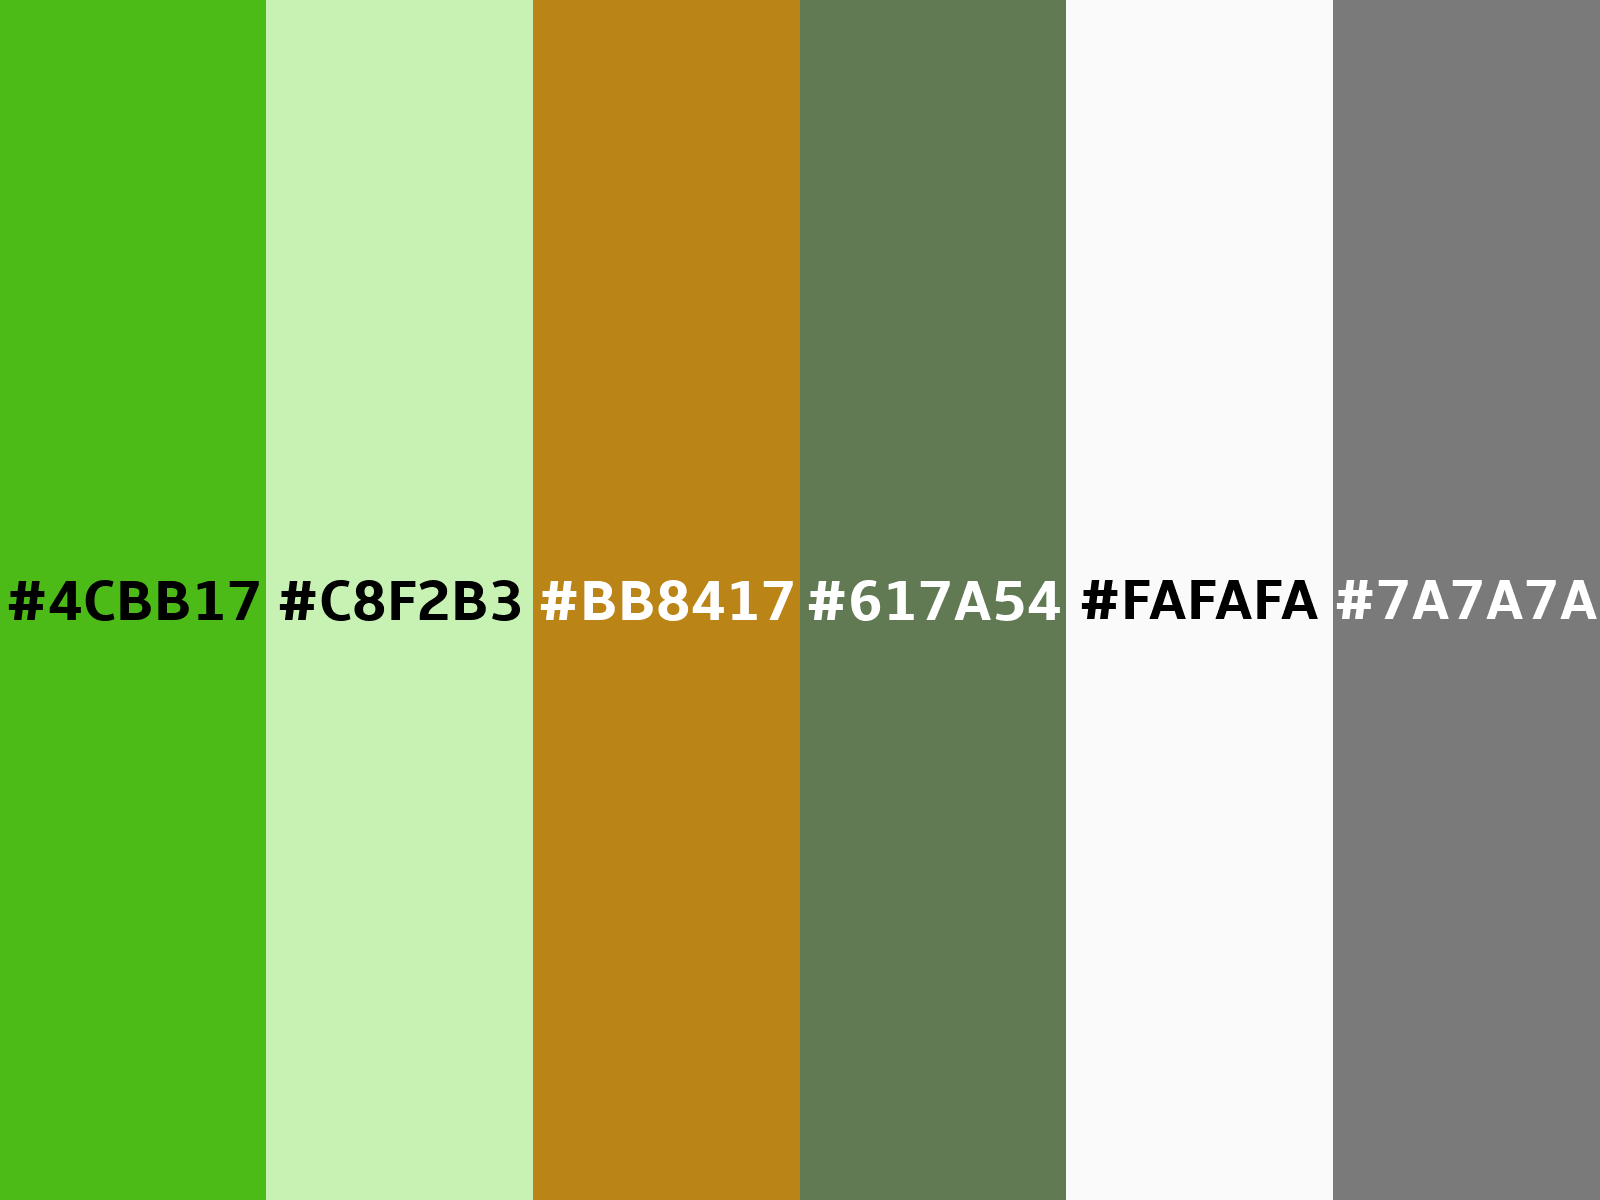 colorswall on X: Shades of Kelly Green color #4CBB17 hex #4cbb17, #44a815,  #3d9612, #358310, #2e700e, #265e0c, #1e4b09, #173807, #0f2505, #081302  #colors #palette   / X